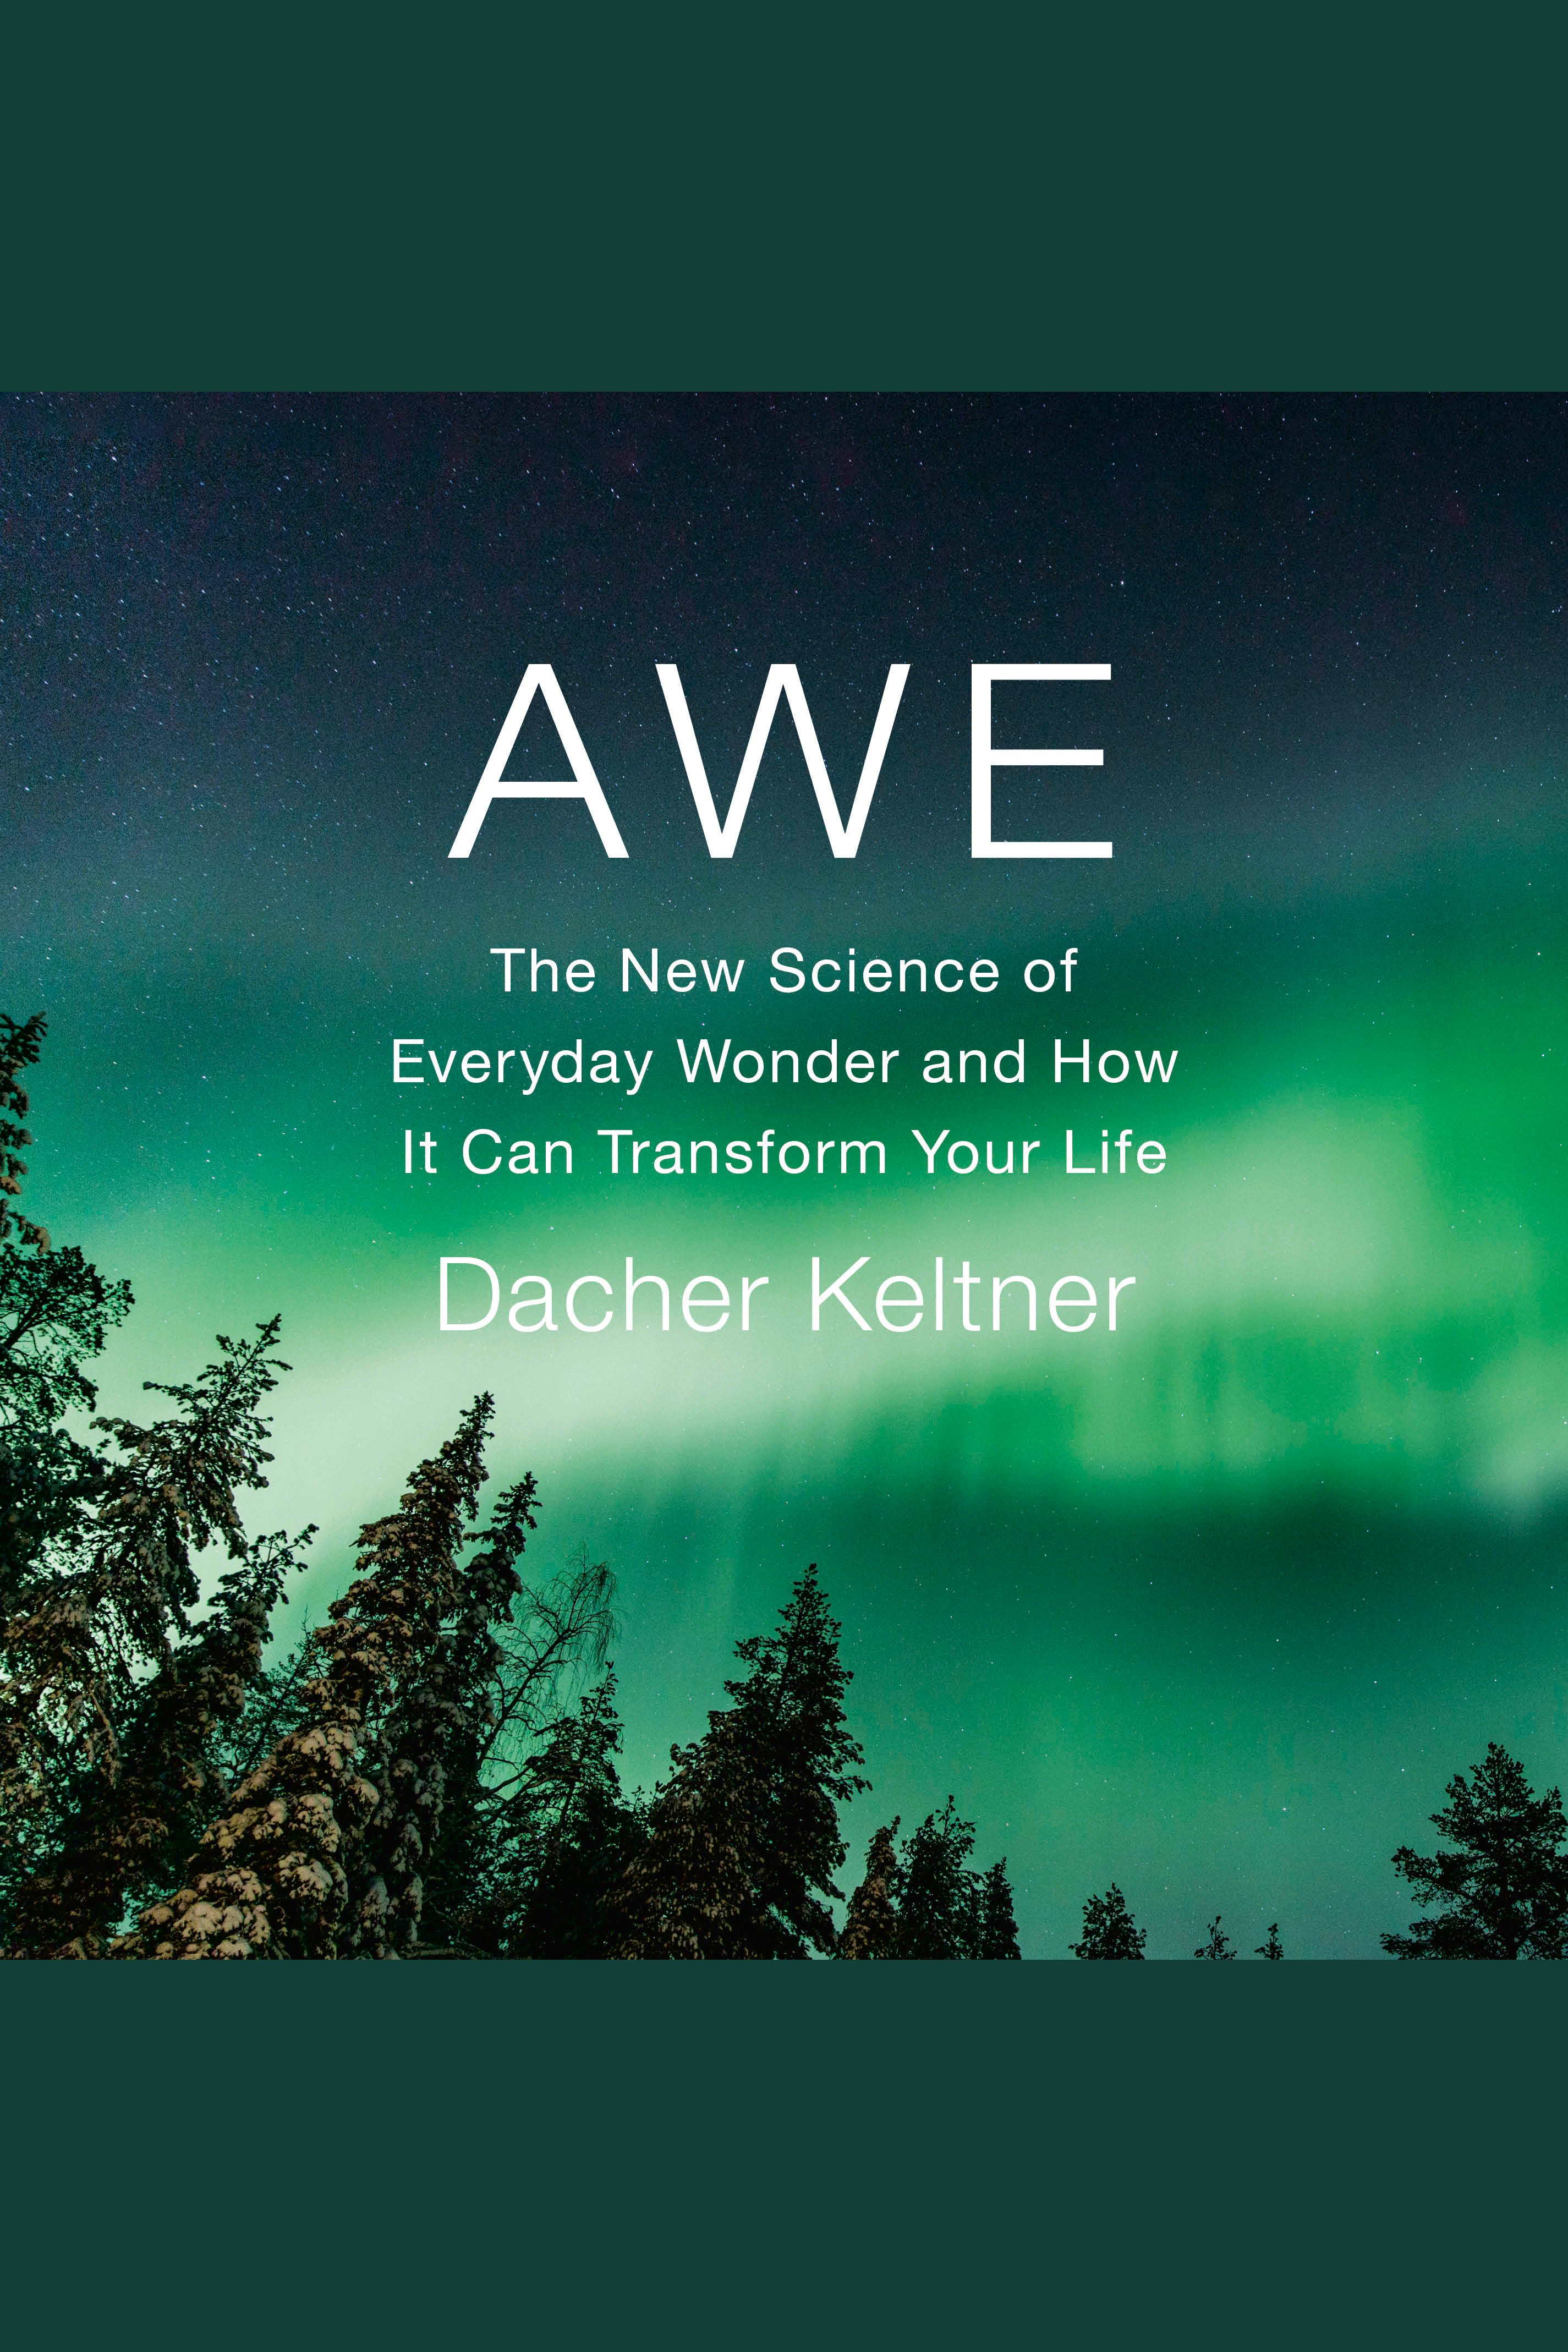 Awe The New Science of Everyday Wonder and How It Can Transform Your Life